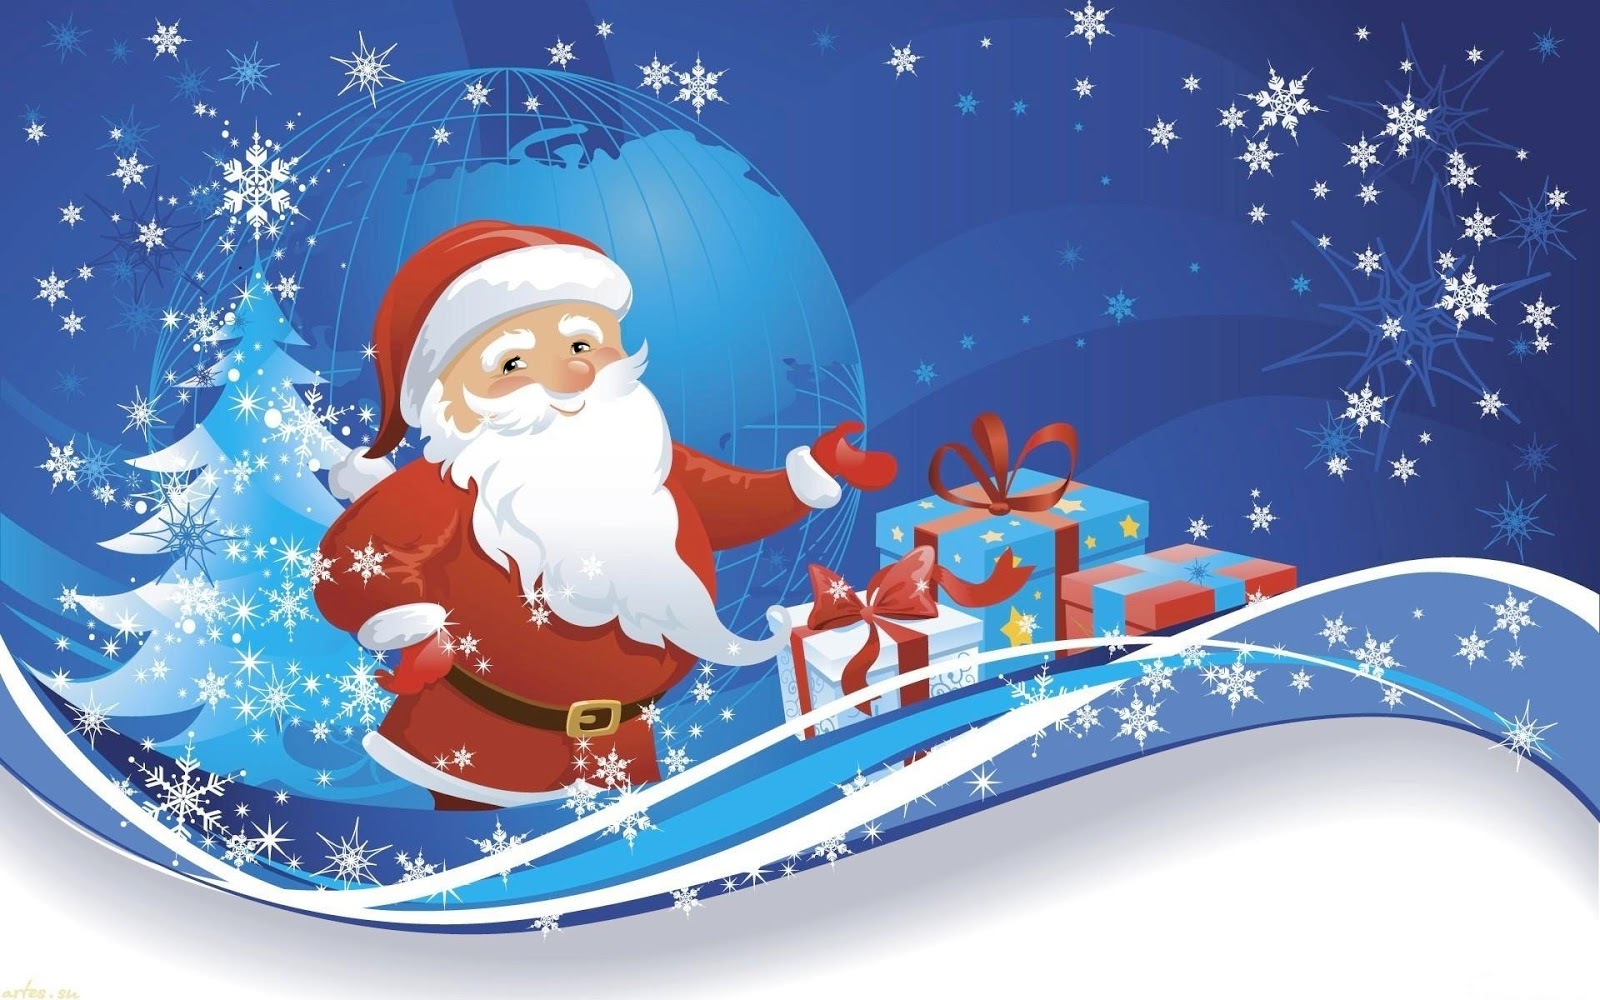 Merry Christmas Santa Claus Image Photos Pictures